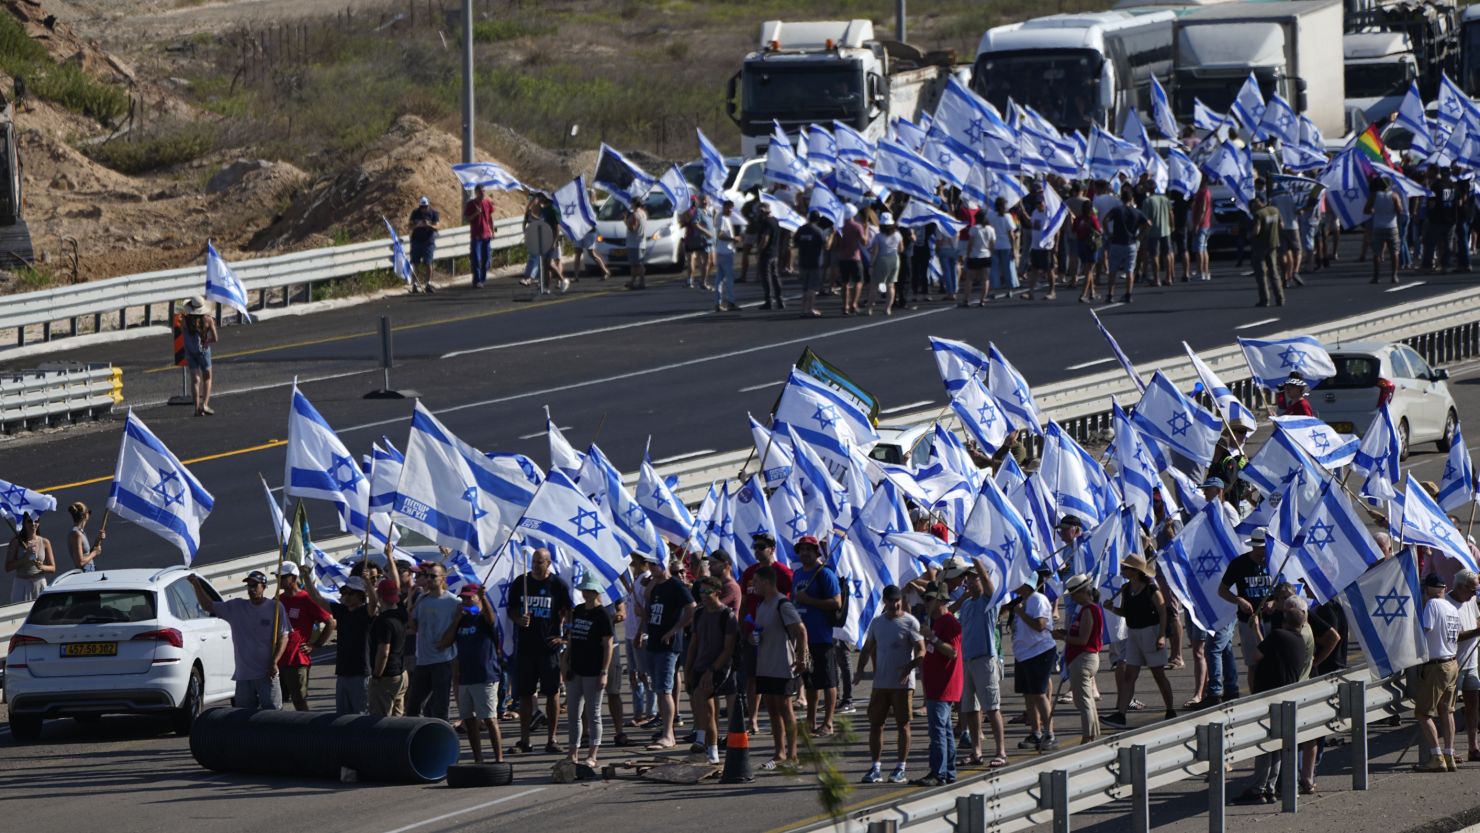 Protesters waving Israeli flags block a highway near Beit Yanai.